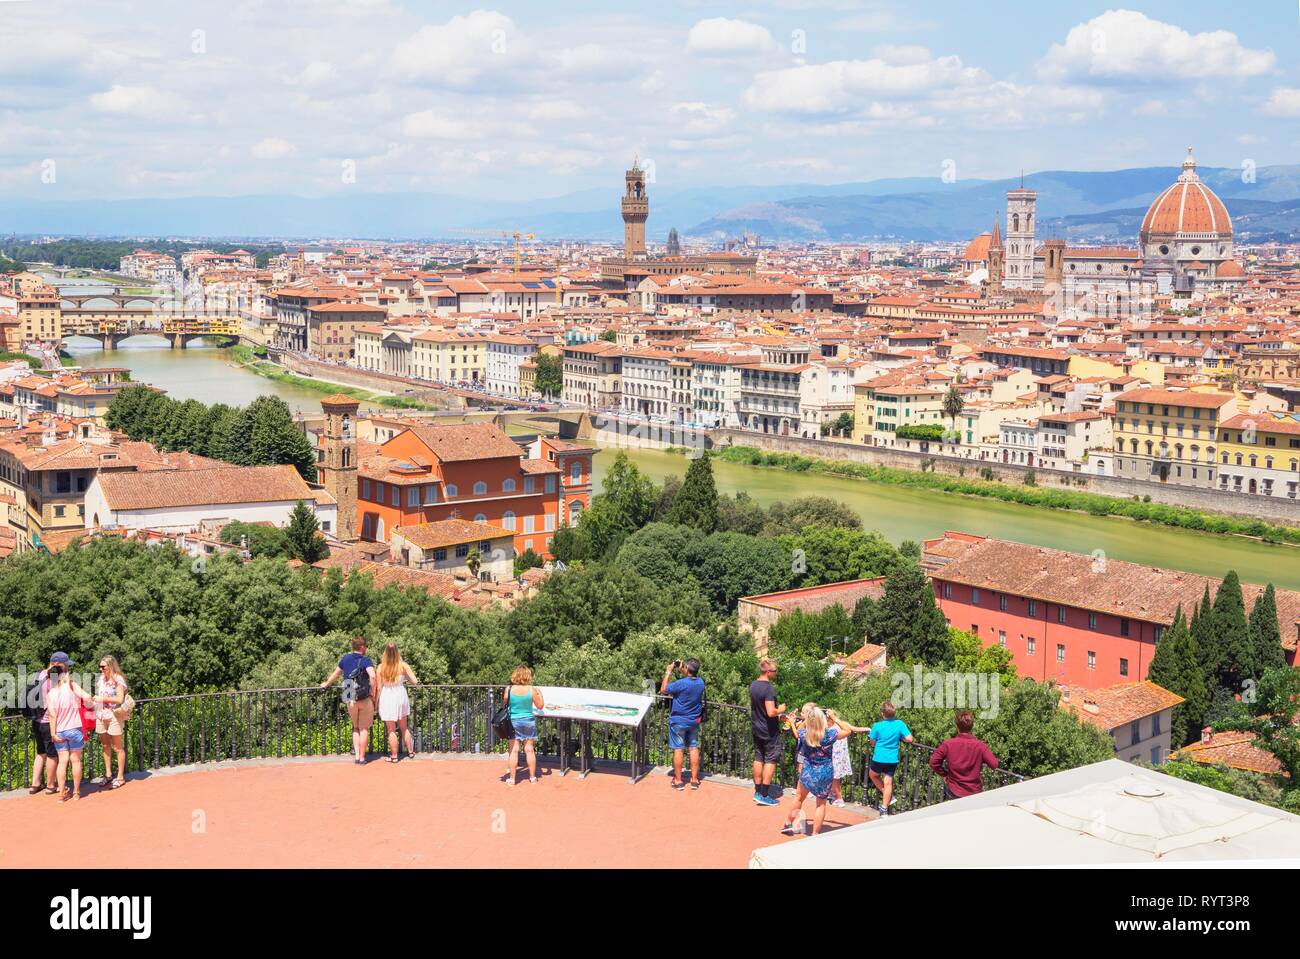 City view, tourists at the Piazzale Michelangelo, Florence, Tuscany, Italy Stock Photo